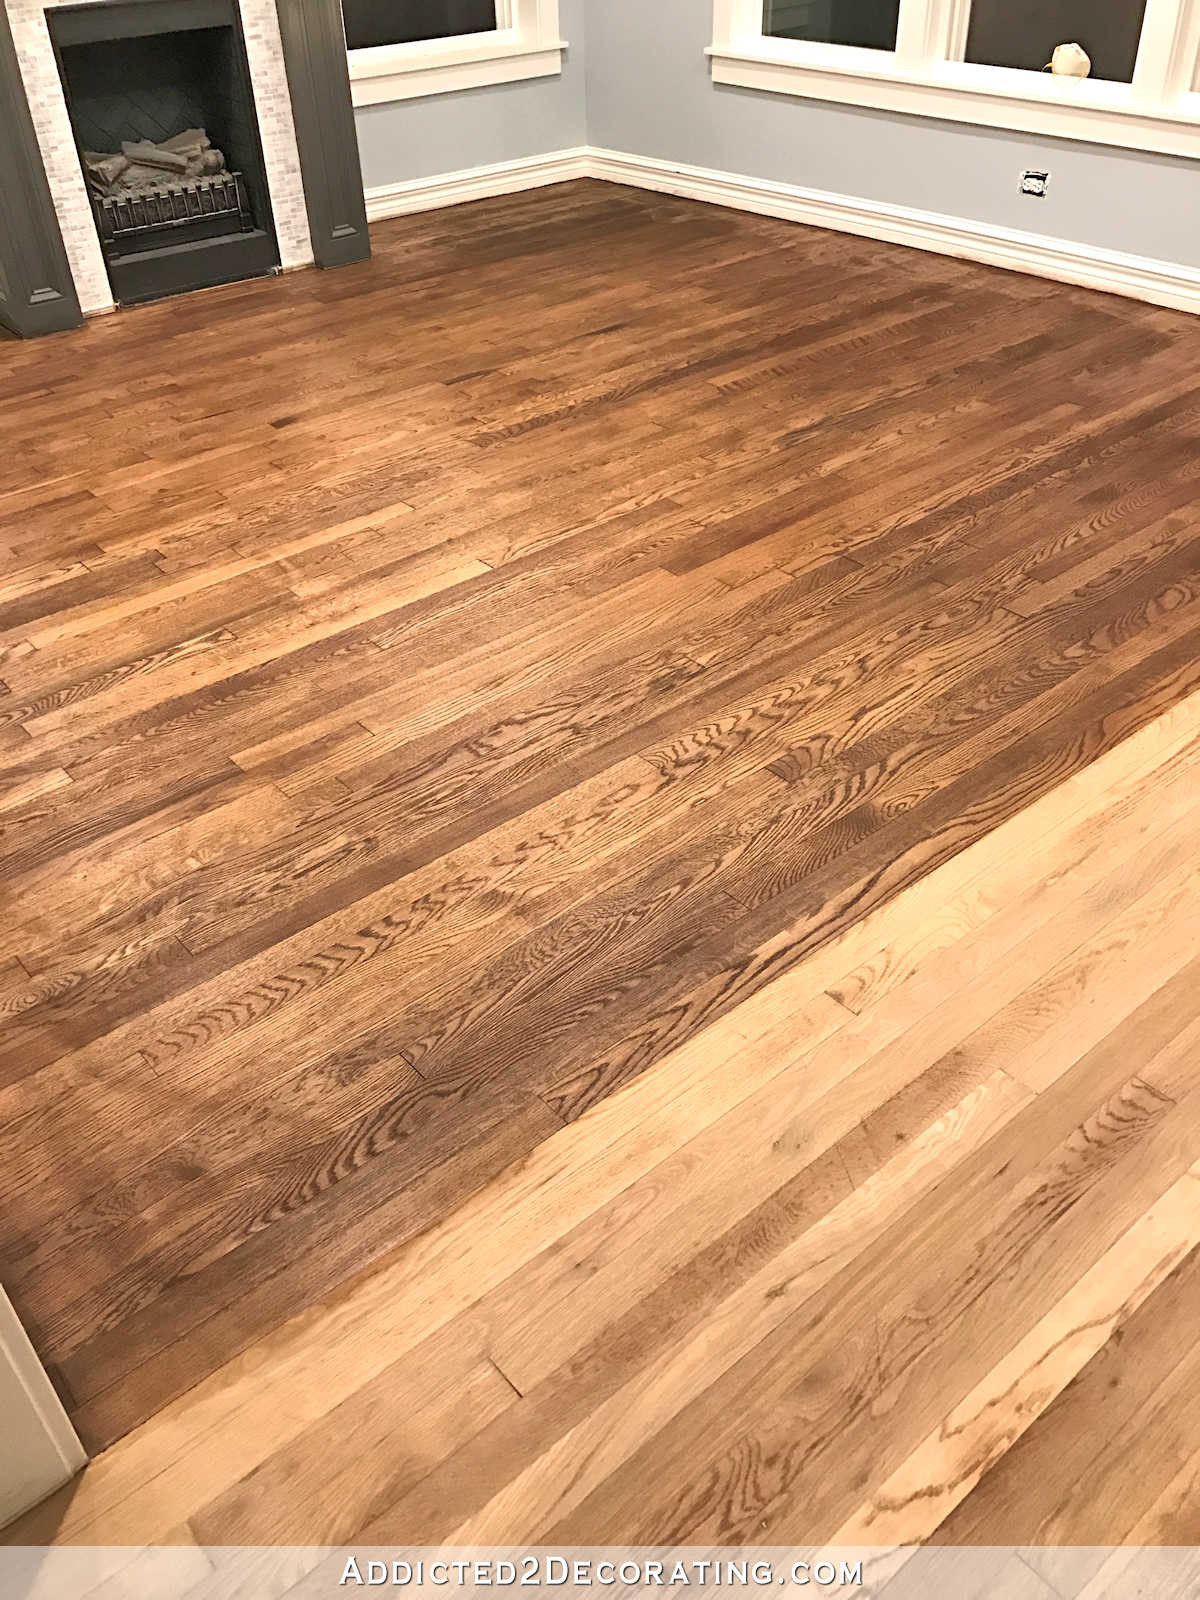 14 Lovely How Much to Refinish Hardwood Floors Yourself 2023 free download how much to refinish hardwood floors yourself of adventures in staining my red oak hardwood floors products process with regard to staining red oak hardwood floors 7 stain on the living room